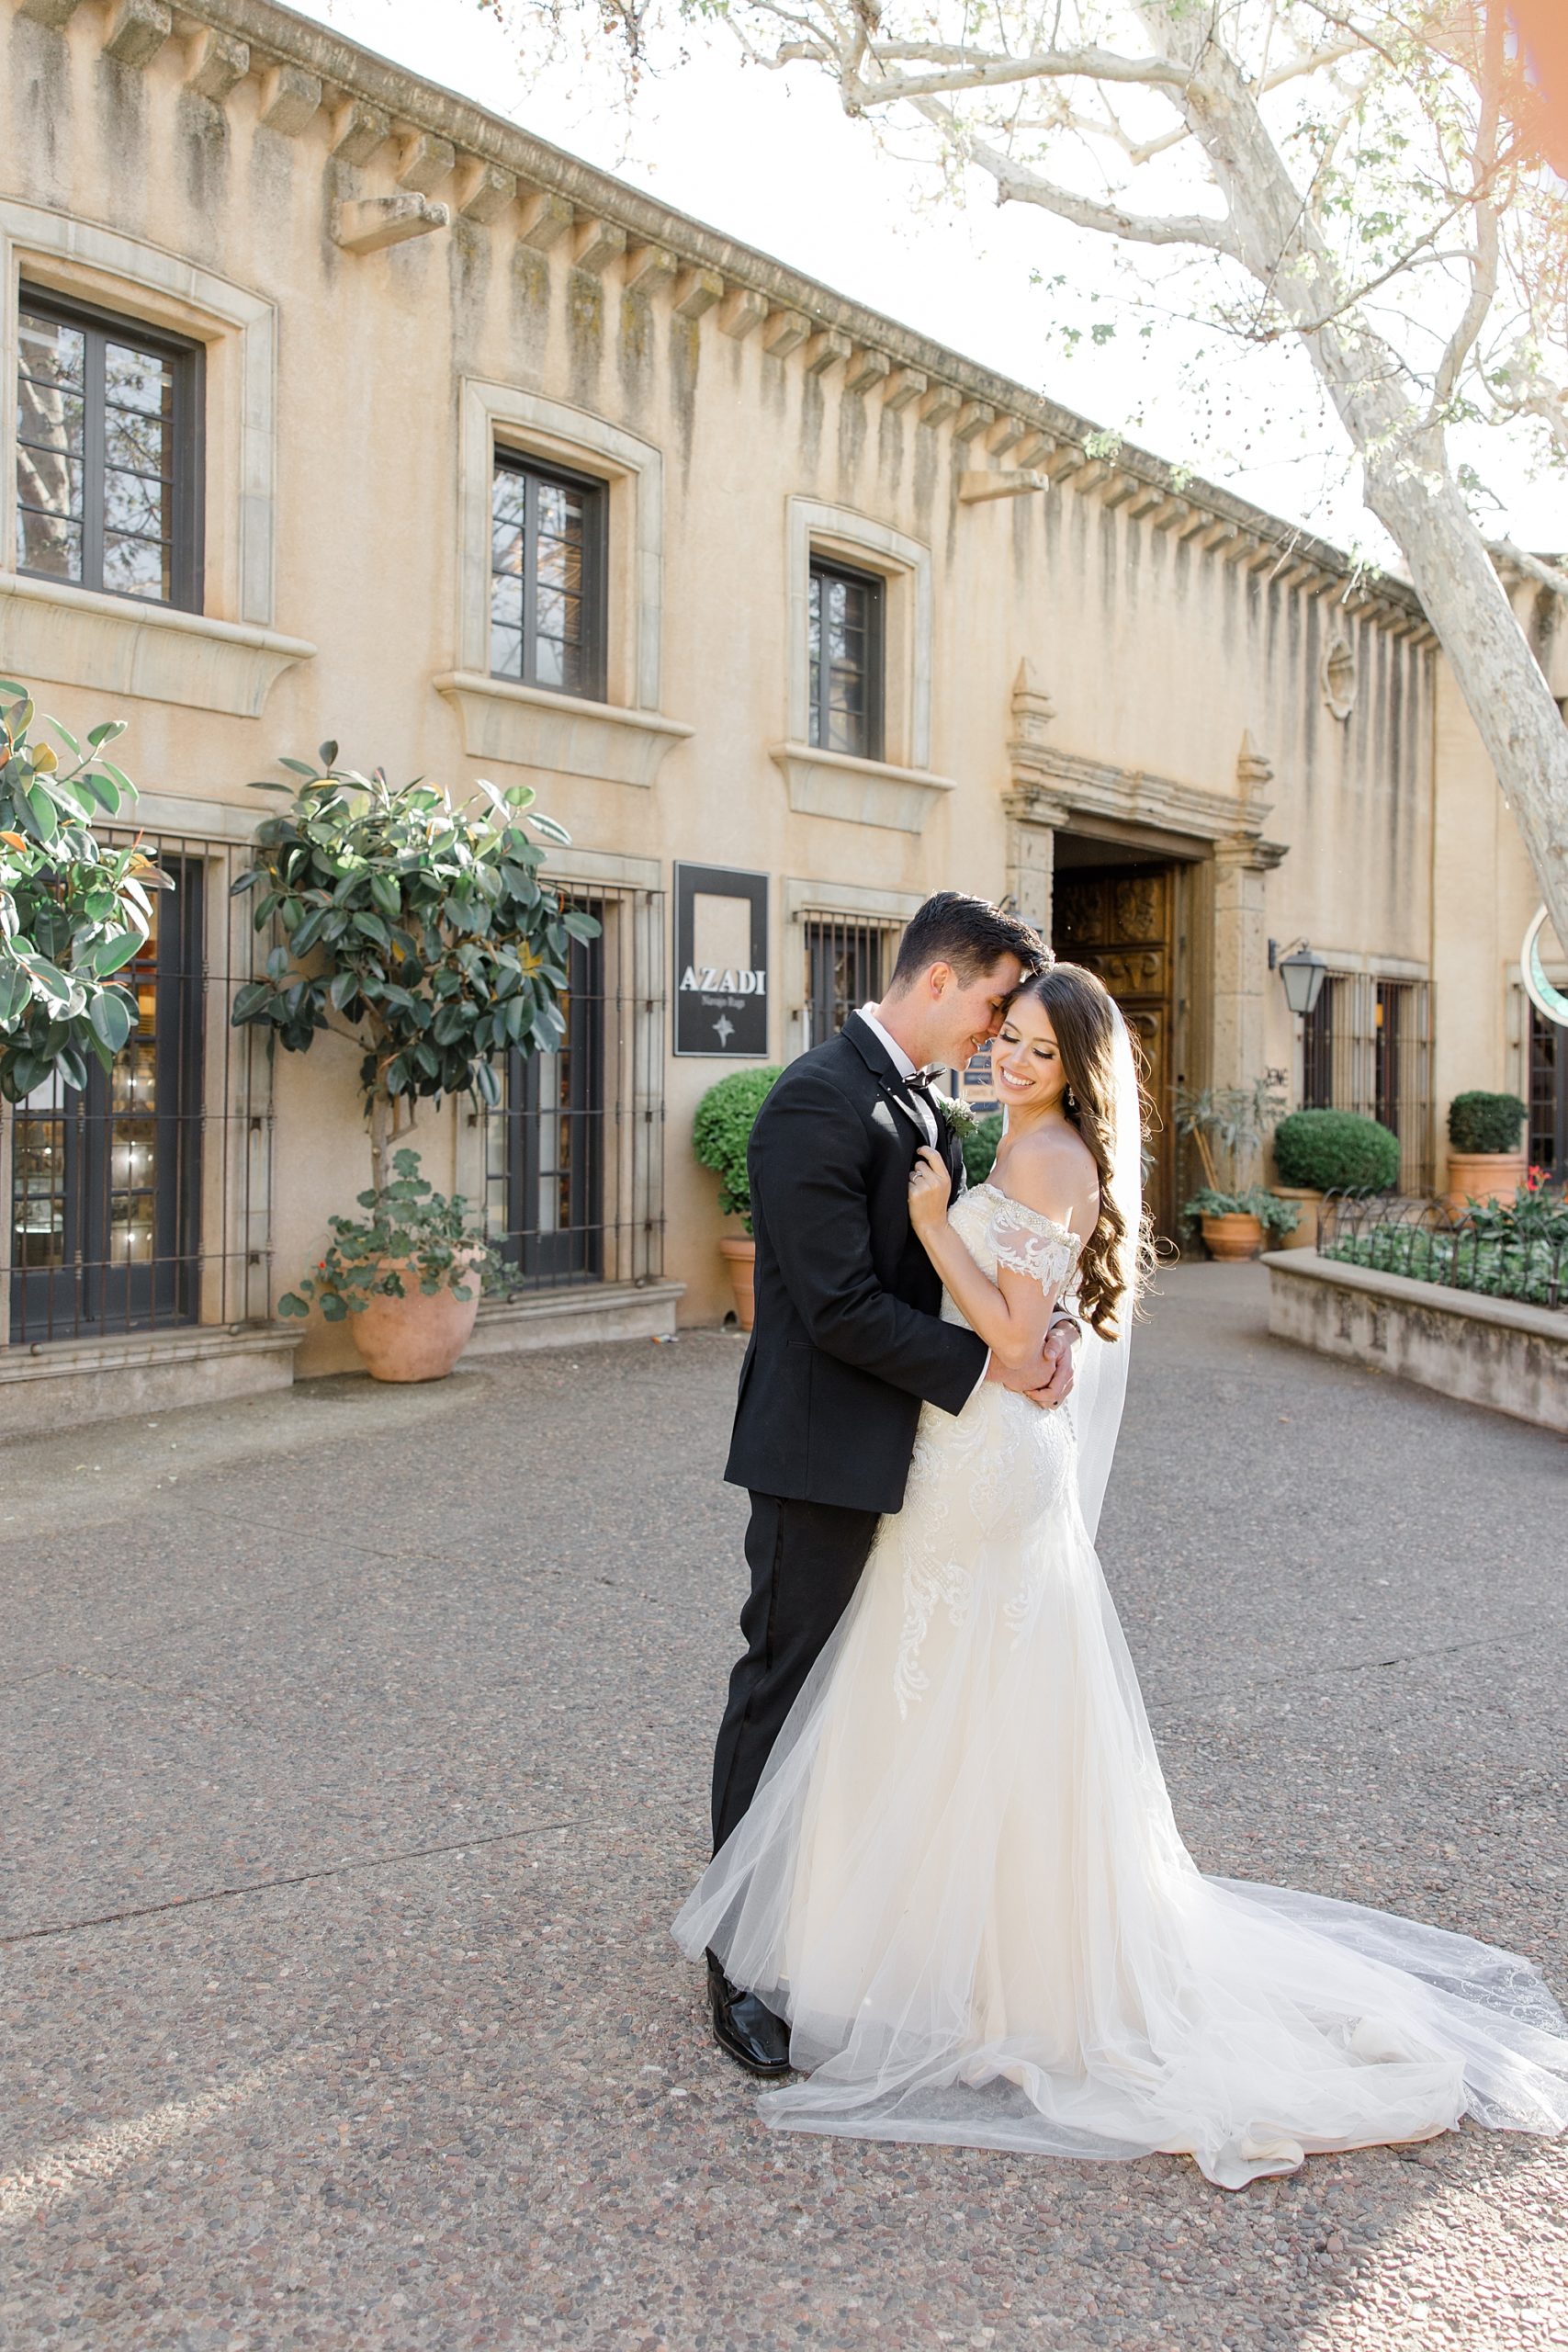 newlyweds kiss in courtyard at Tlaquepaque